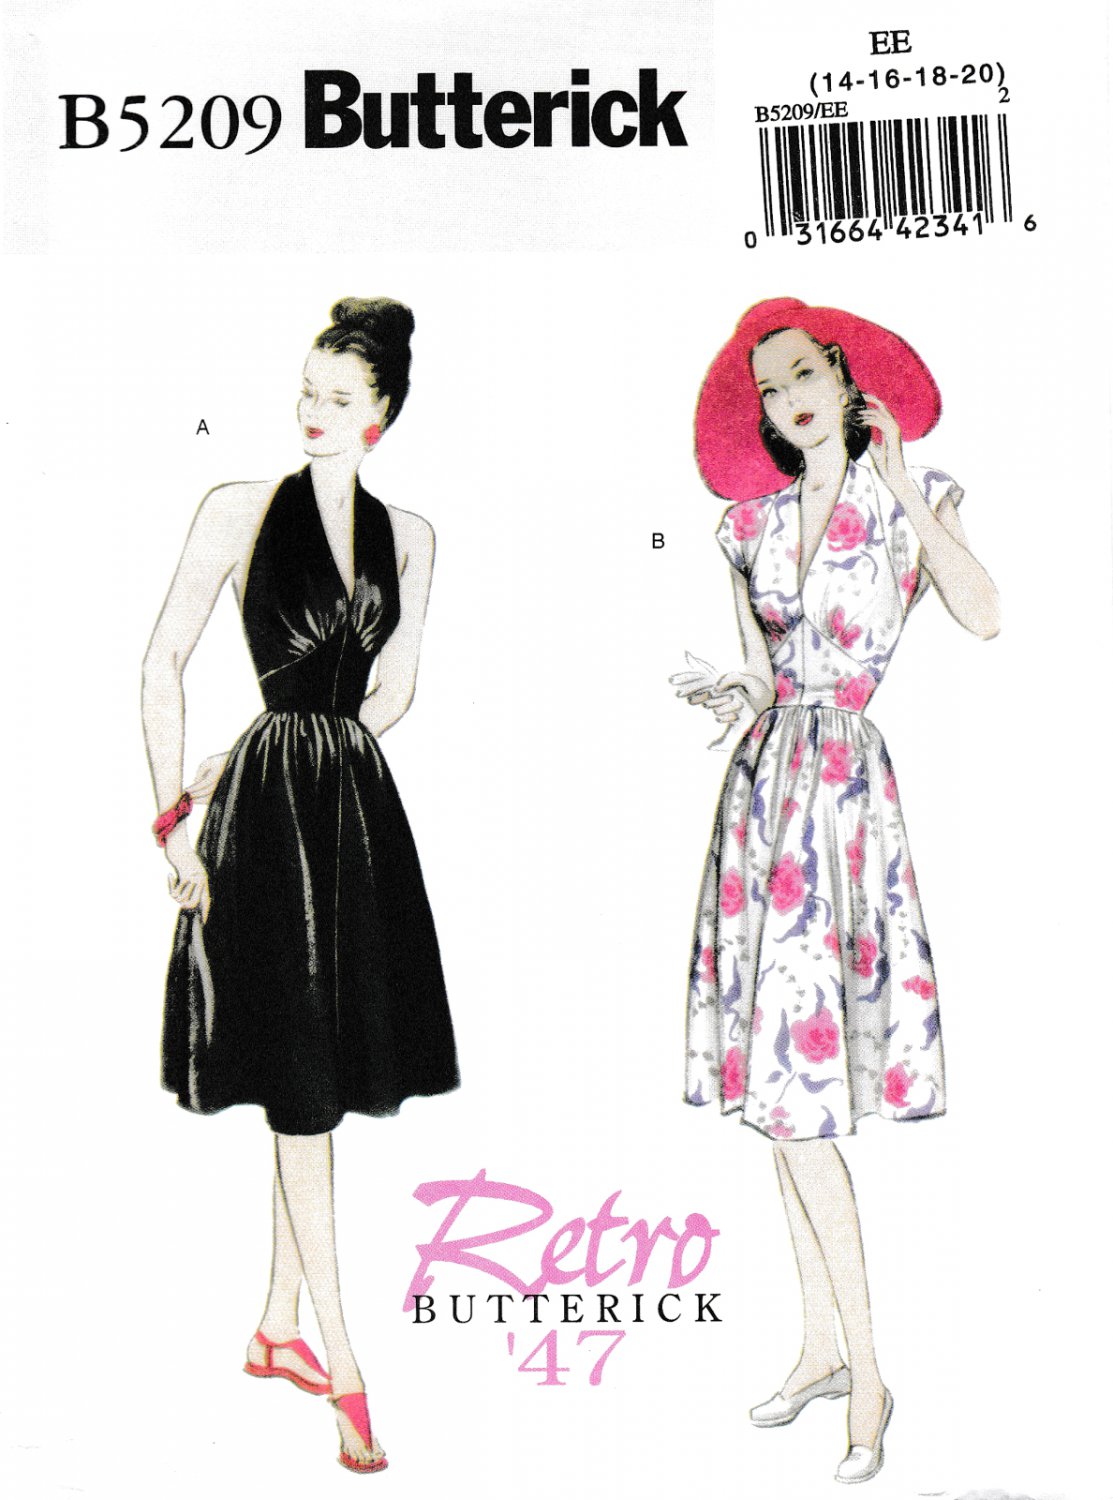 Butterick B5209 5209 Womens Halter Dress Retro 1947 Vintage Style Sewing Pattern Size 14-16-18-20